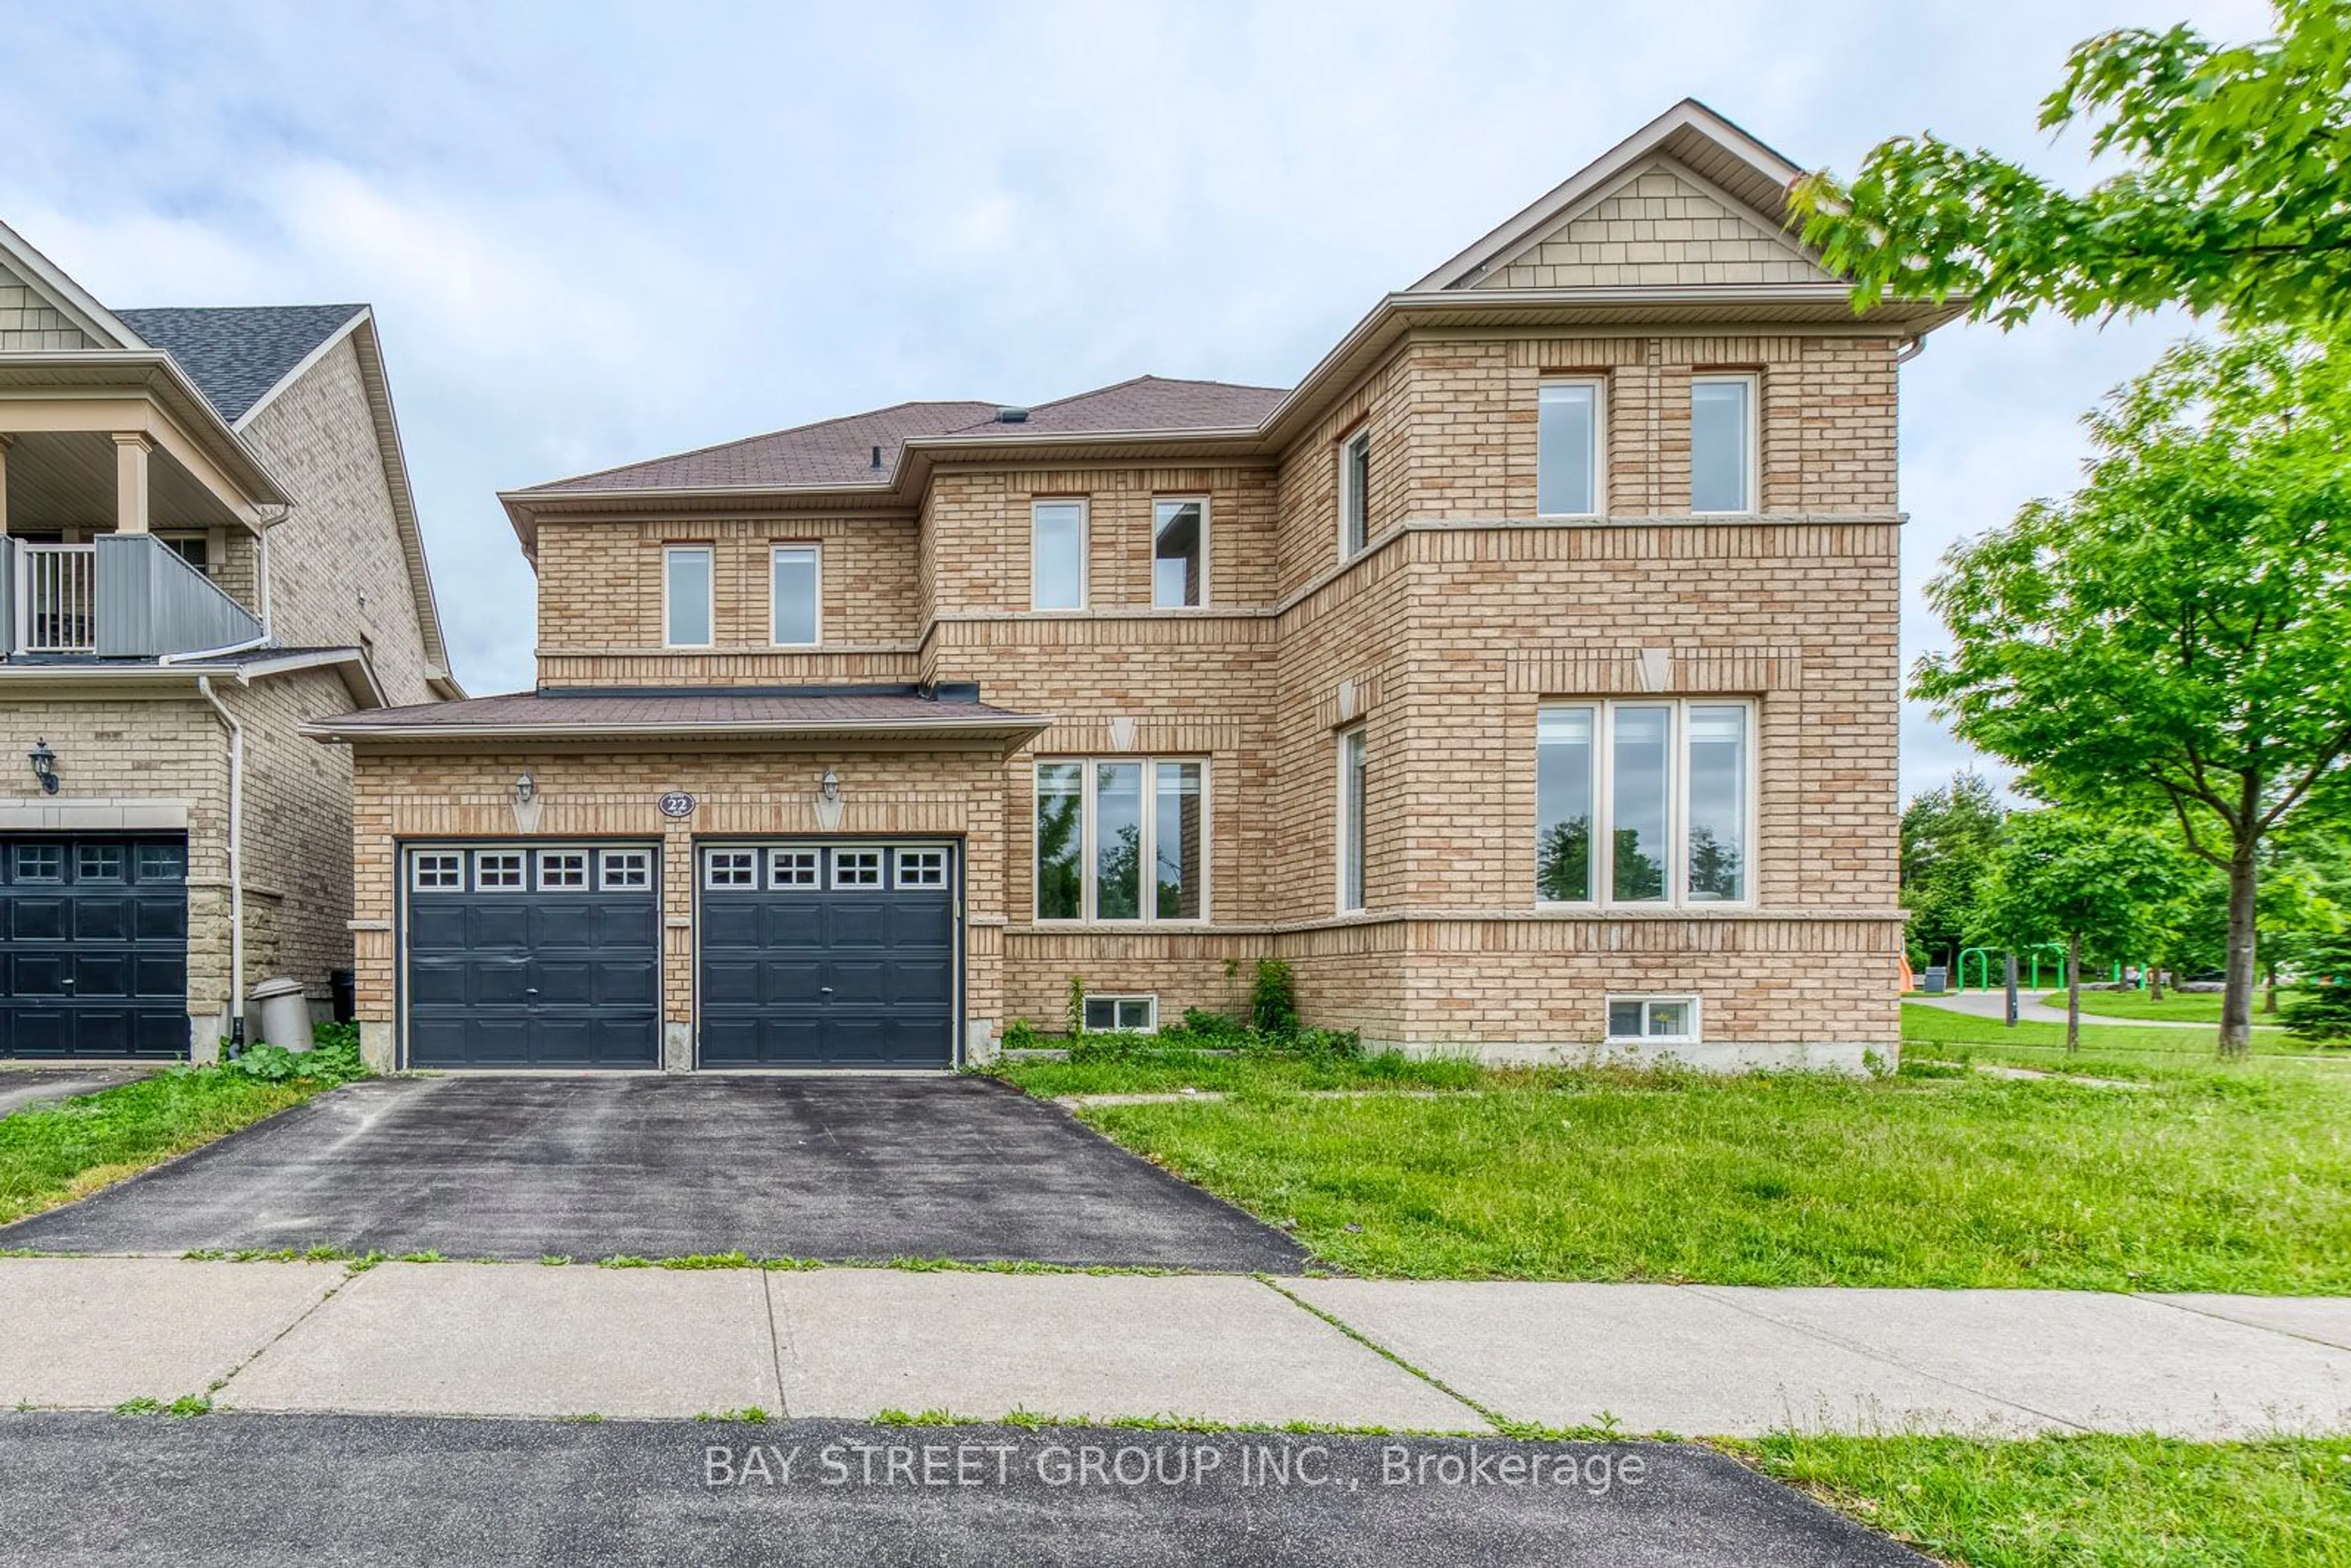 Home with brick exterior material for 22 Dairy Ave, Richmond Hill Ontario L4E 4X4